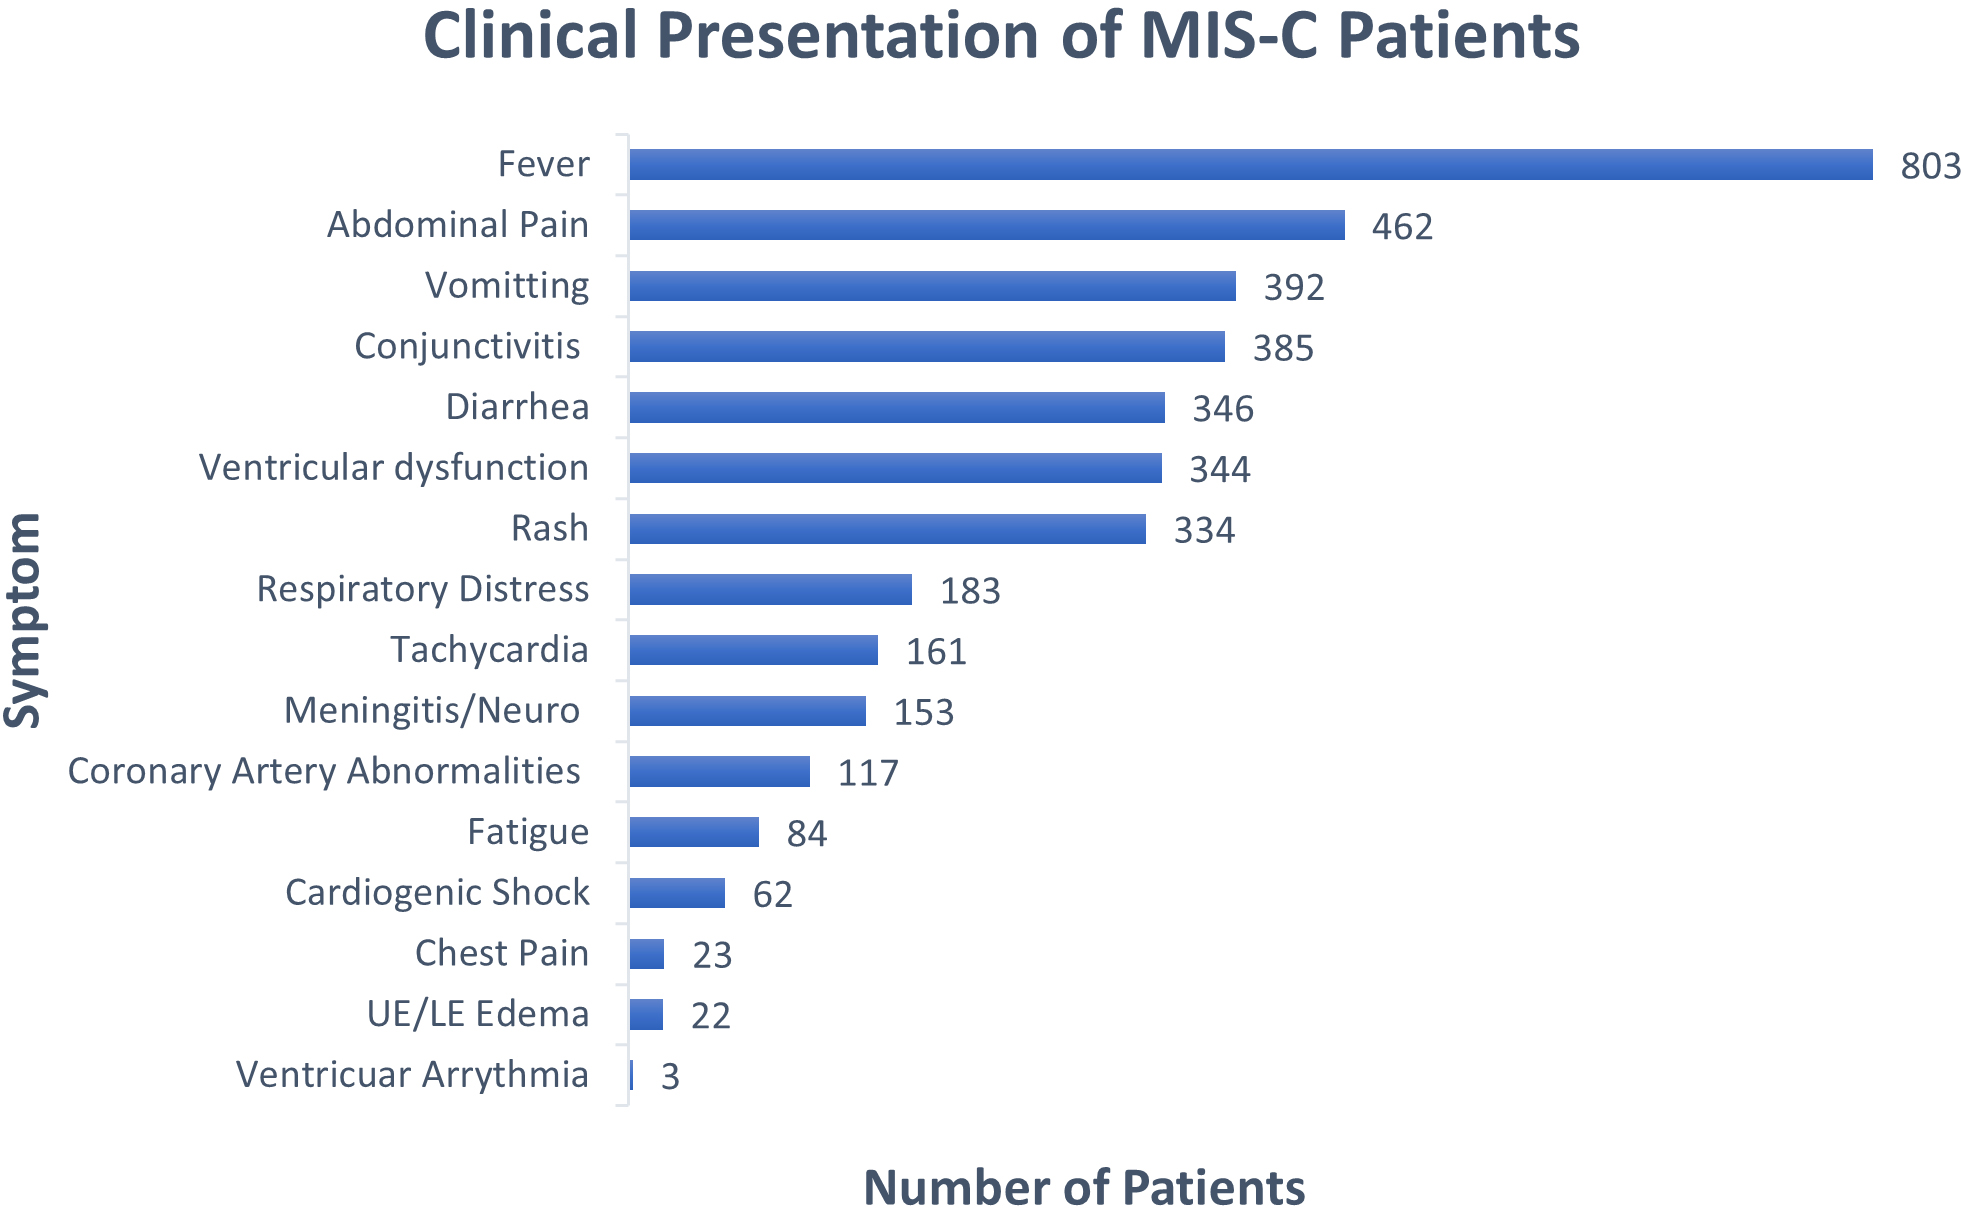 Clinical presentation of patients reported.